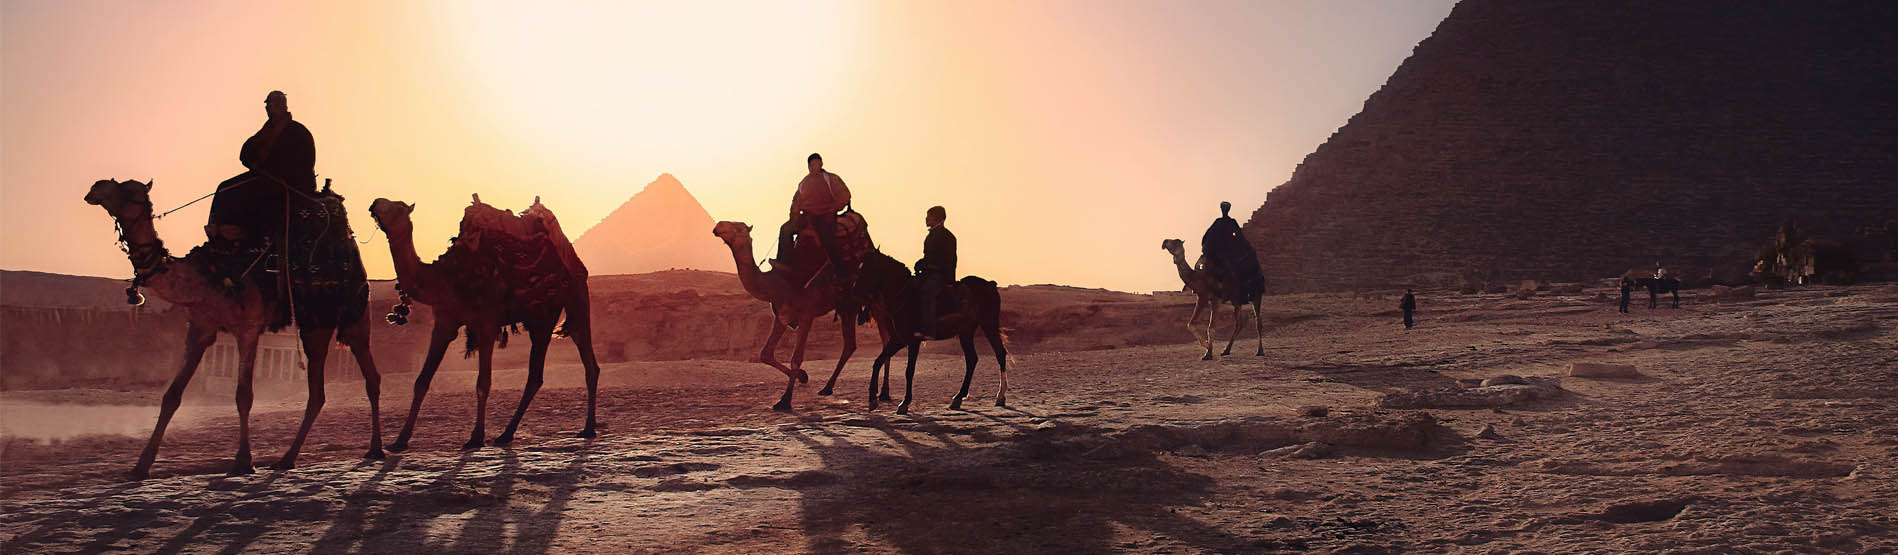 Image of camels walking in a desert with Egyptian pyramids in the background 